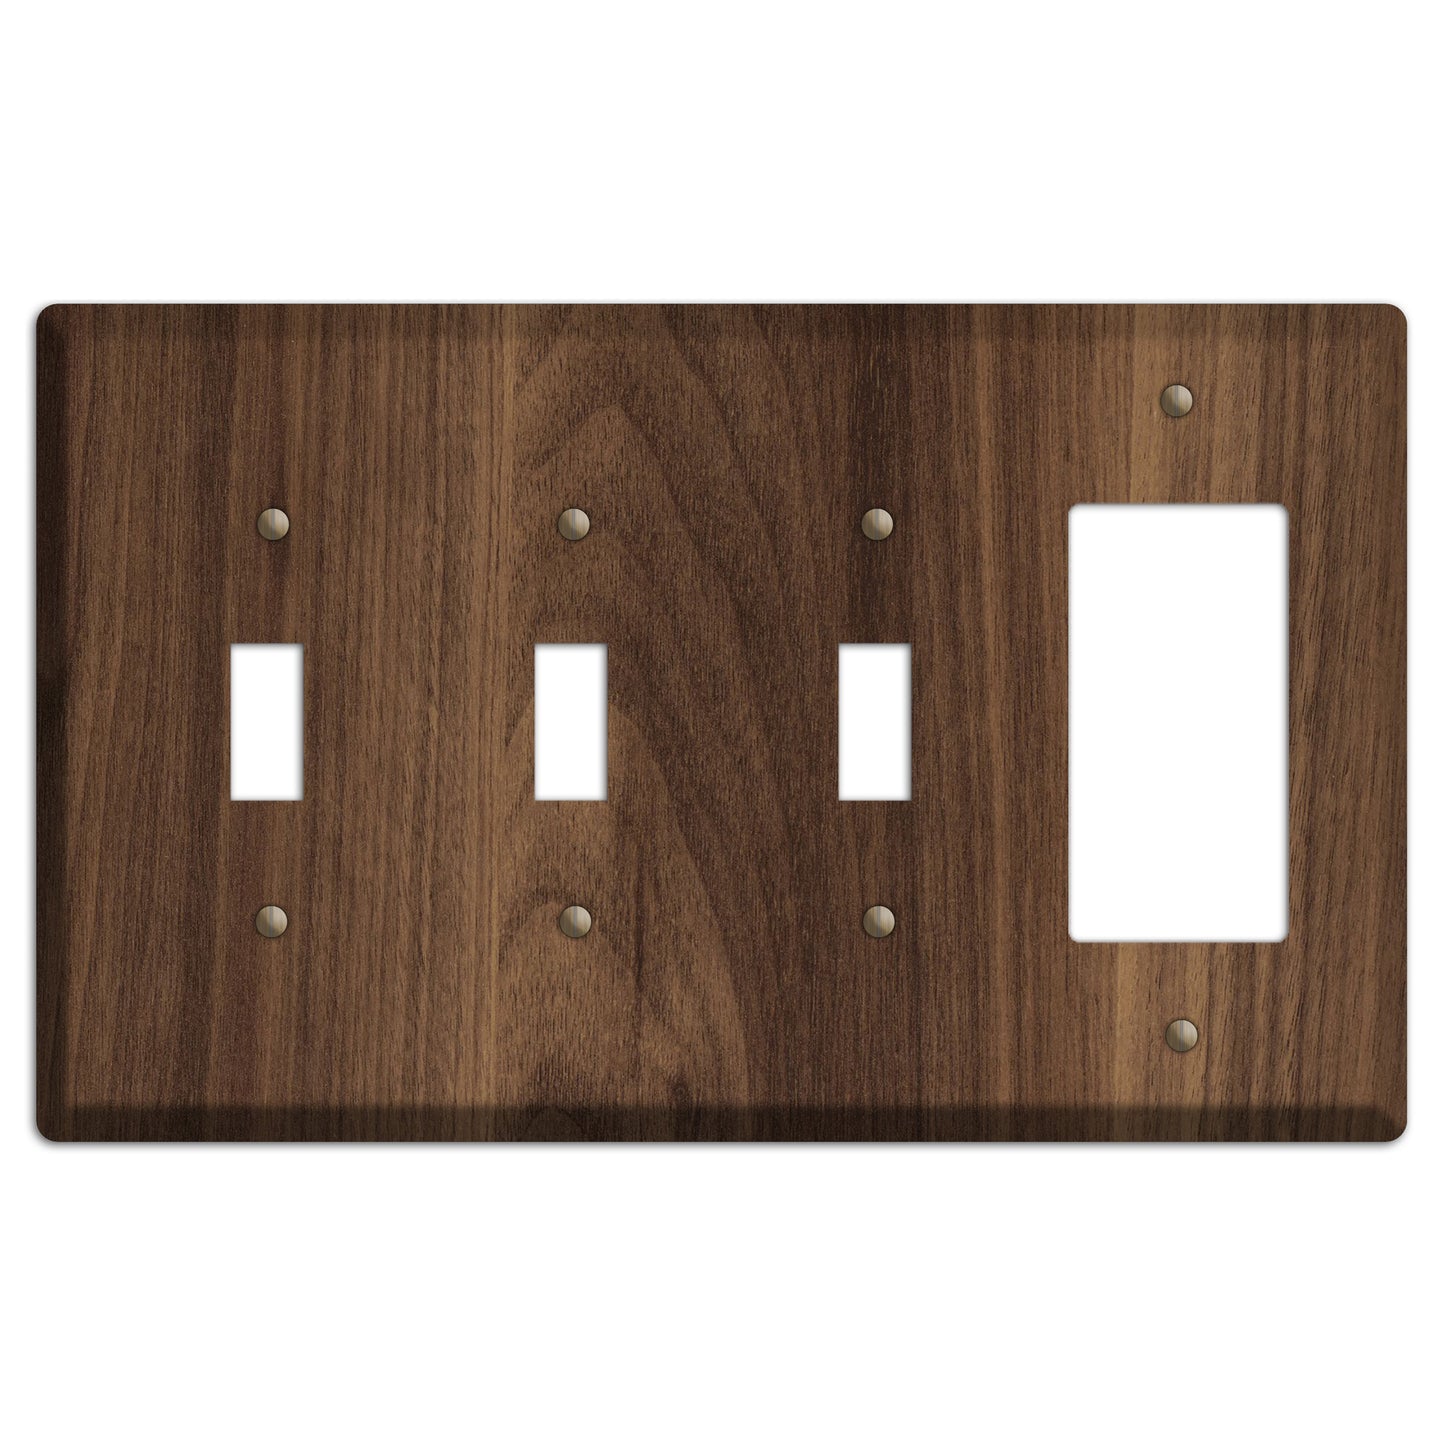 Unfinished Walnut Wood 3 Toggle / Rocker Outlet Cover Plate